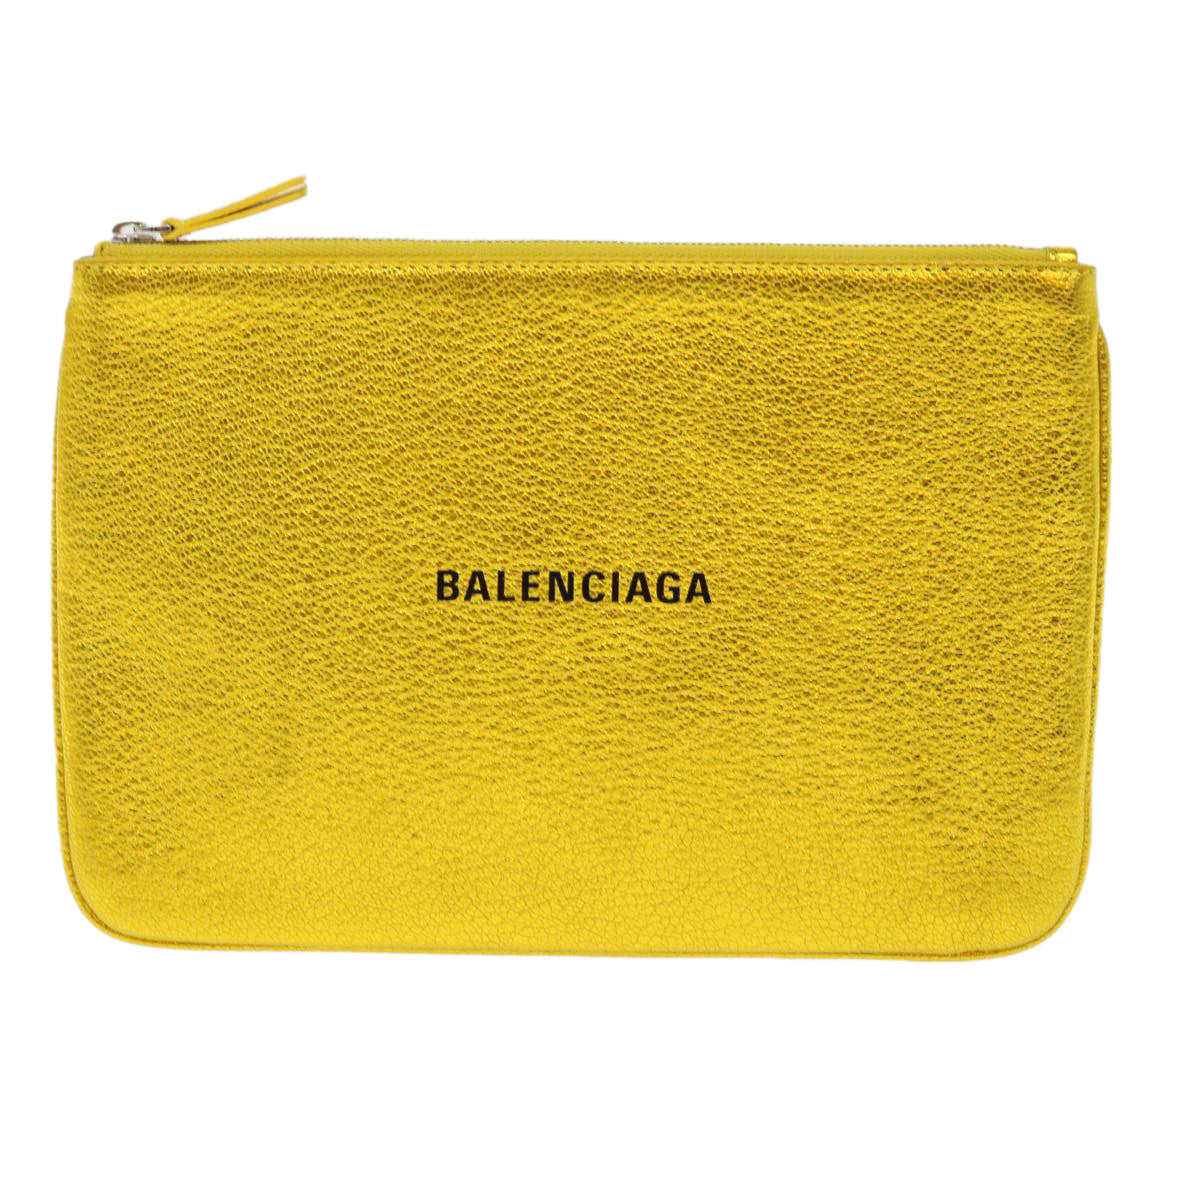 Balenciaga Pouch Leather Gold Auth 46667